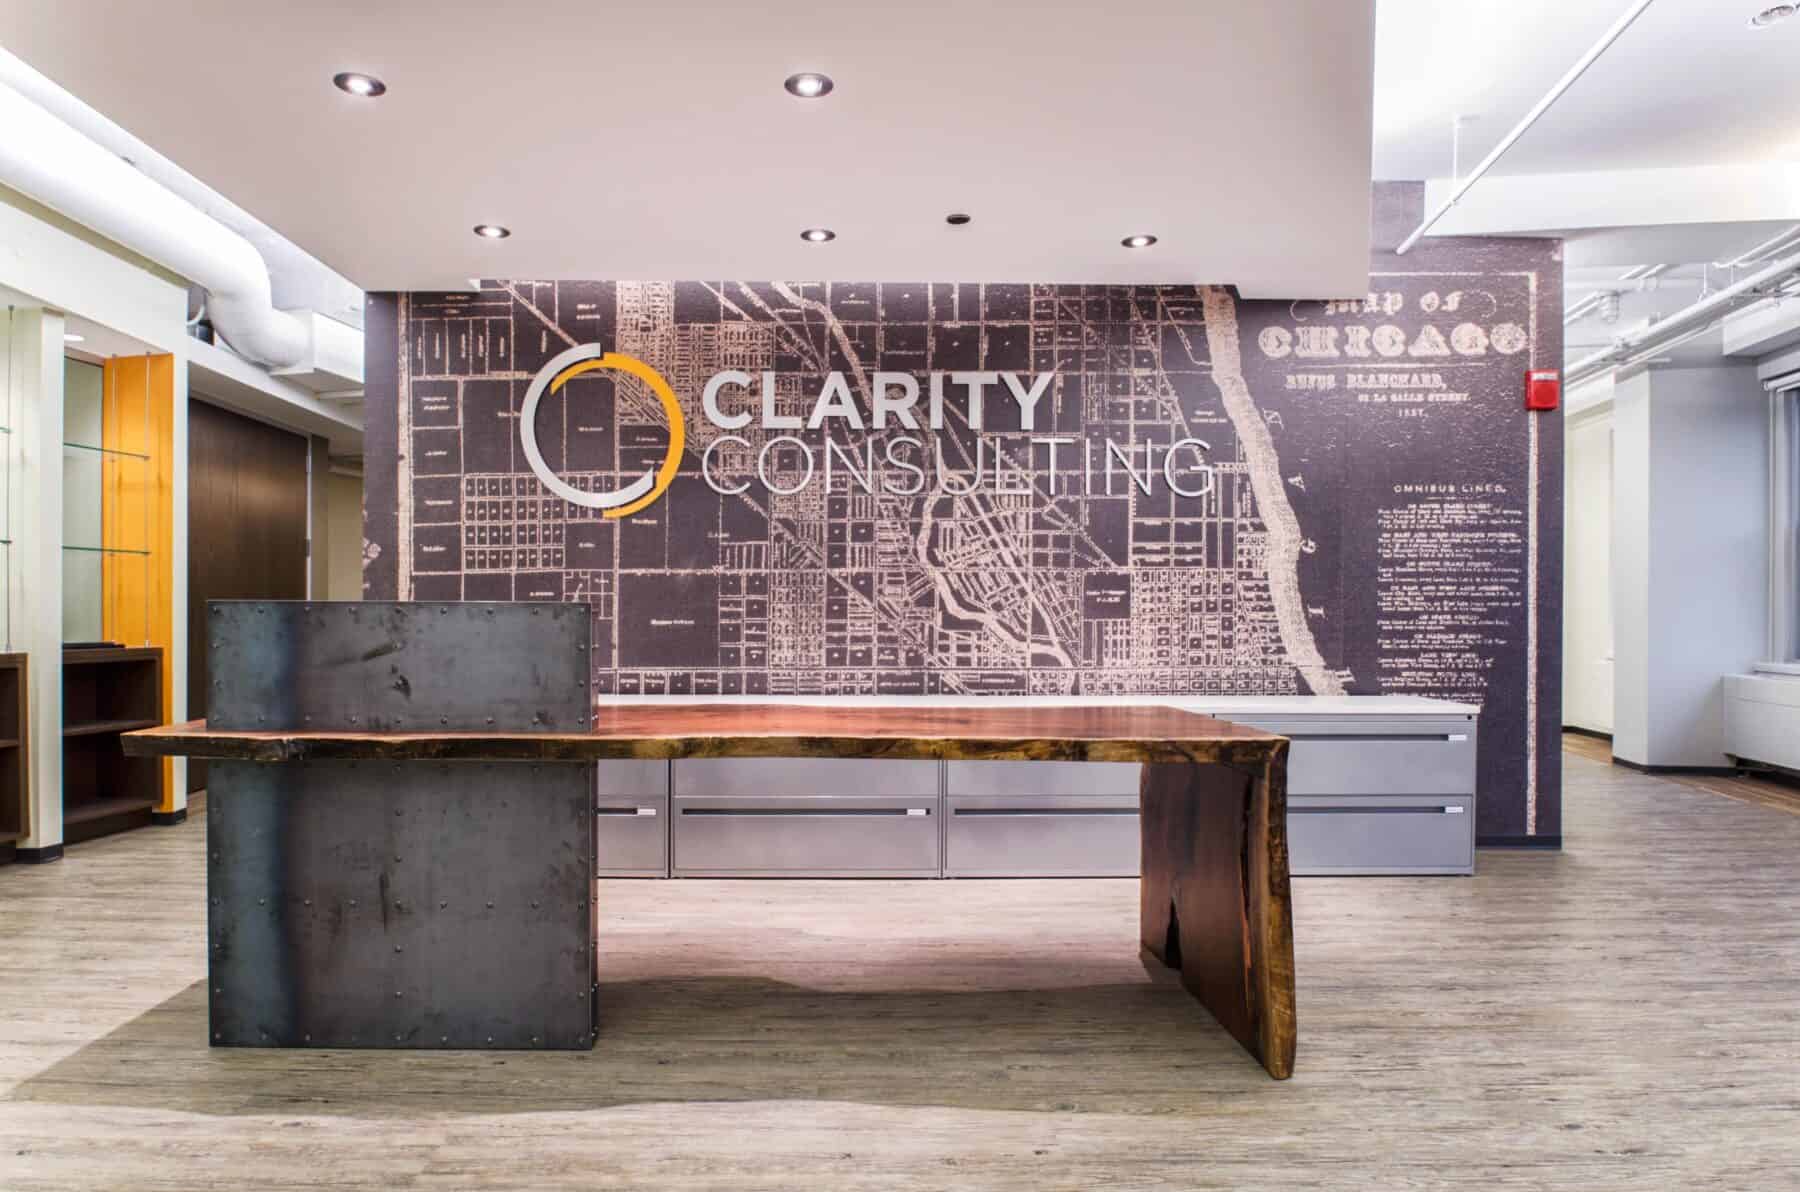 Custom Fabrication of Architectural Distressed Metalwork with Rivets and Walnut Reception Desk from Construction Specialty Projects by Commercial Builder & General Contractor Structural Enterprises